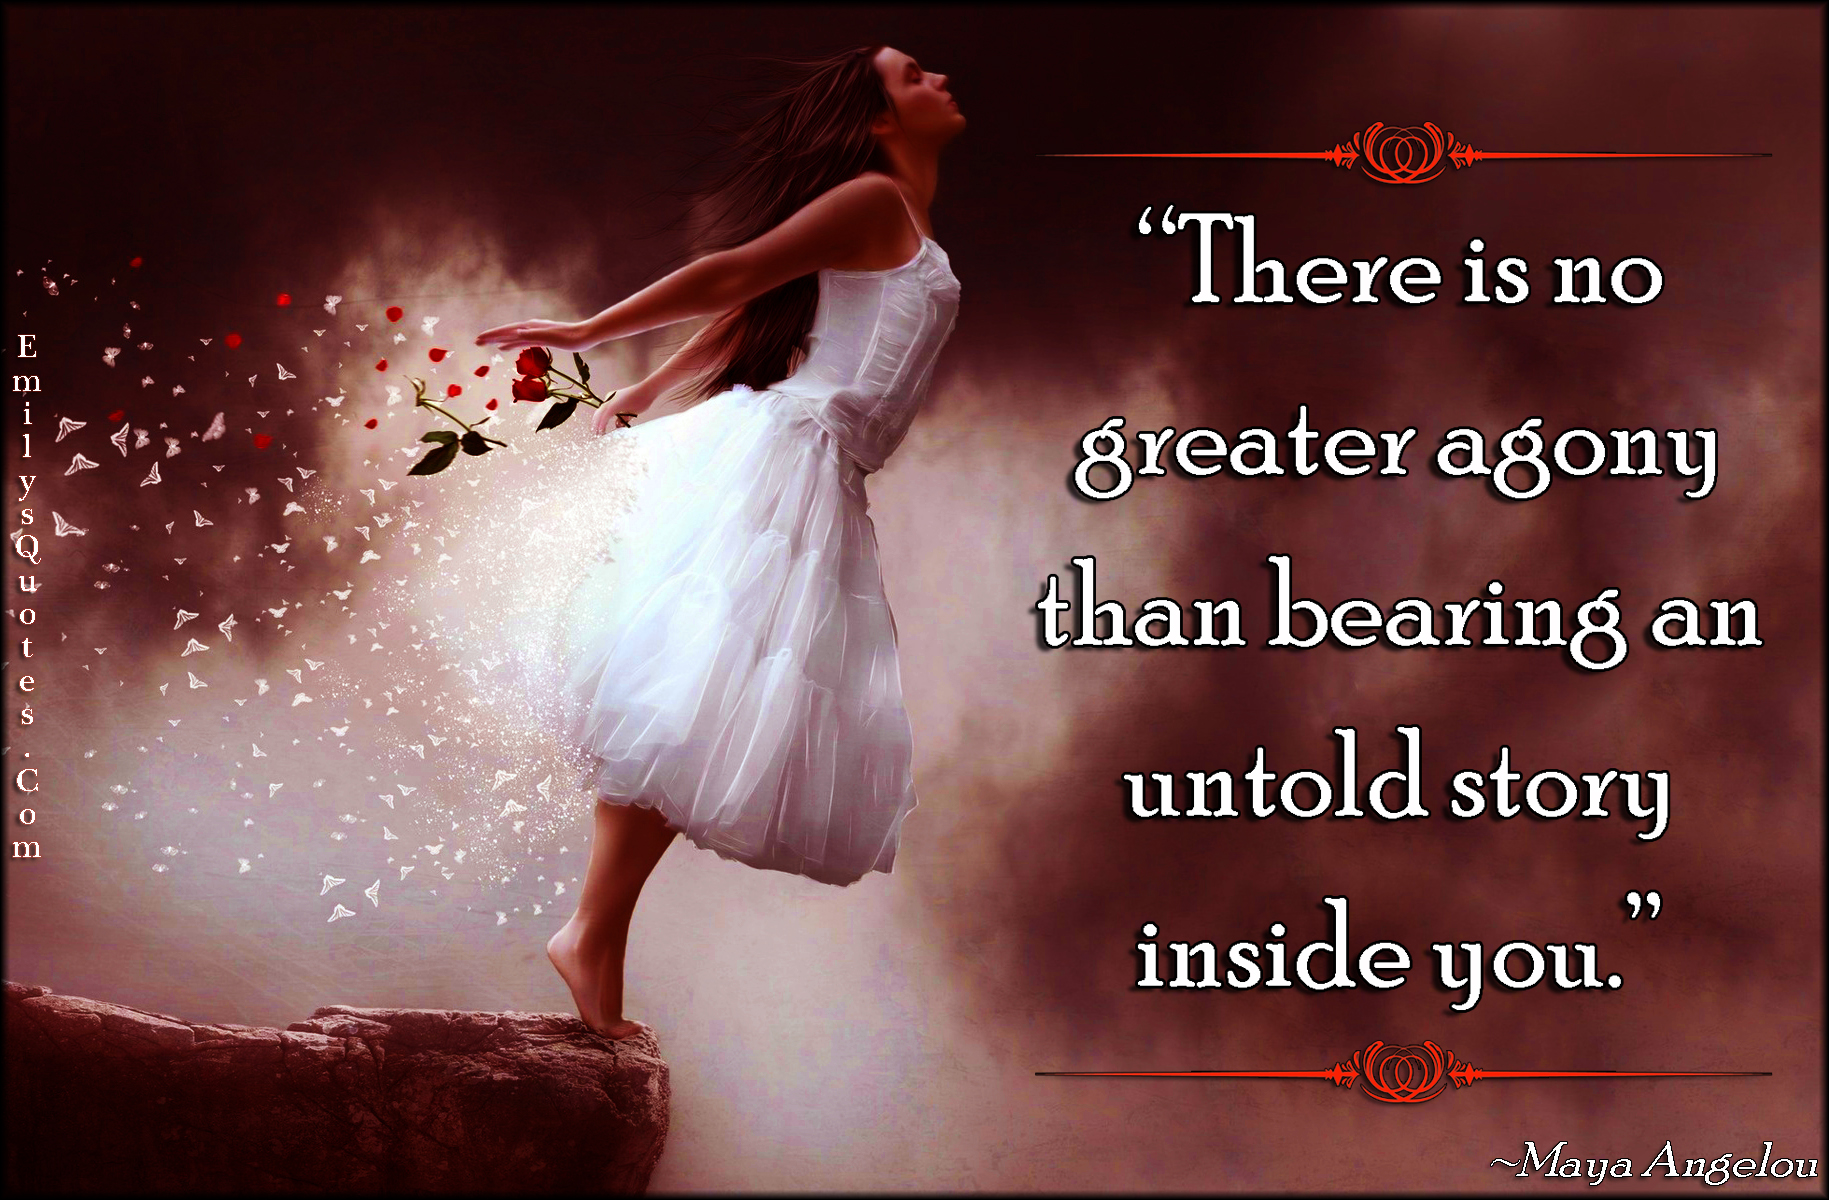 There is no greater agony than bearing an untold story inside you